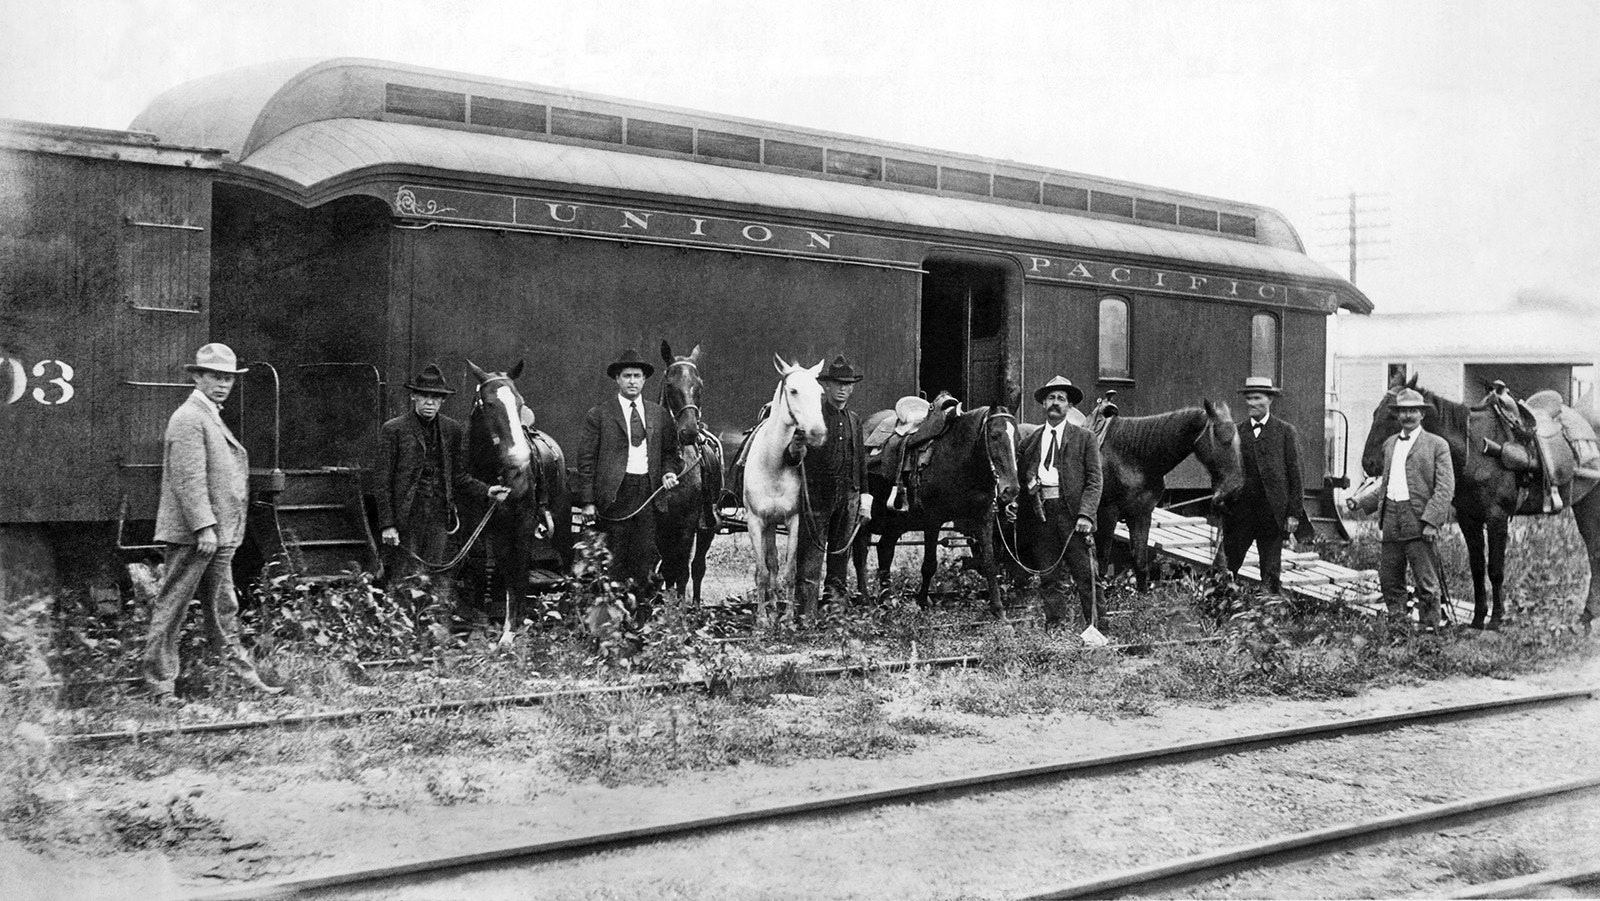 The special car of the Union Pacific Railroad for the mounted rangers organized by UP Special Agent Timothy Keliher to stop the Wild Bunch Gang led by Butch Cassidy and the Sundance Kid.